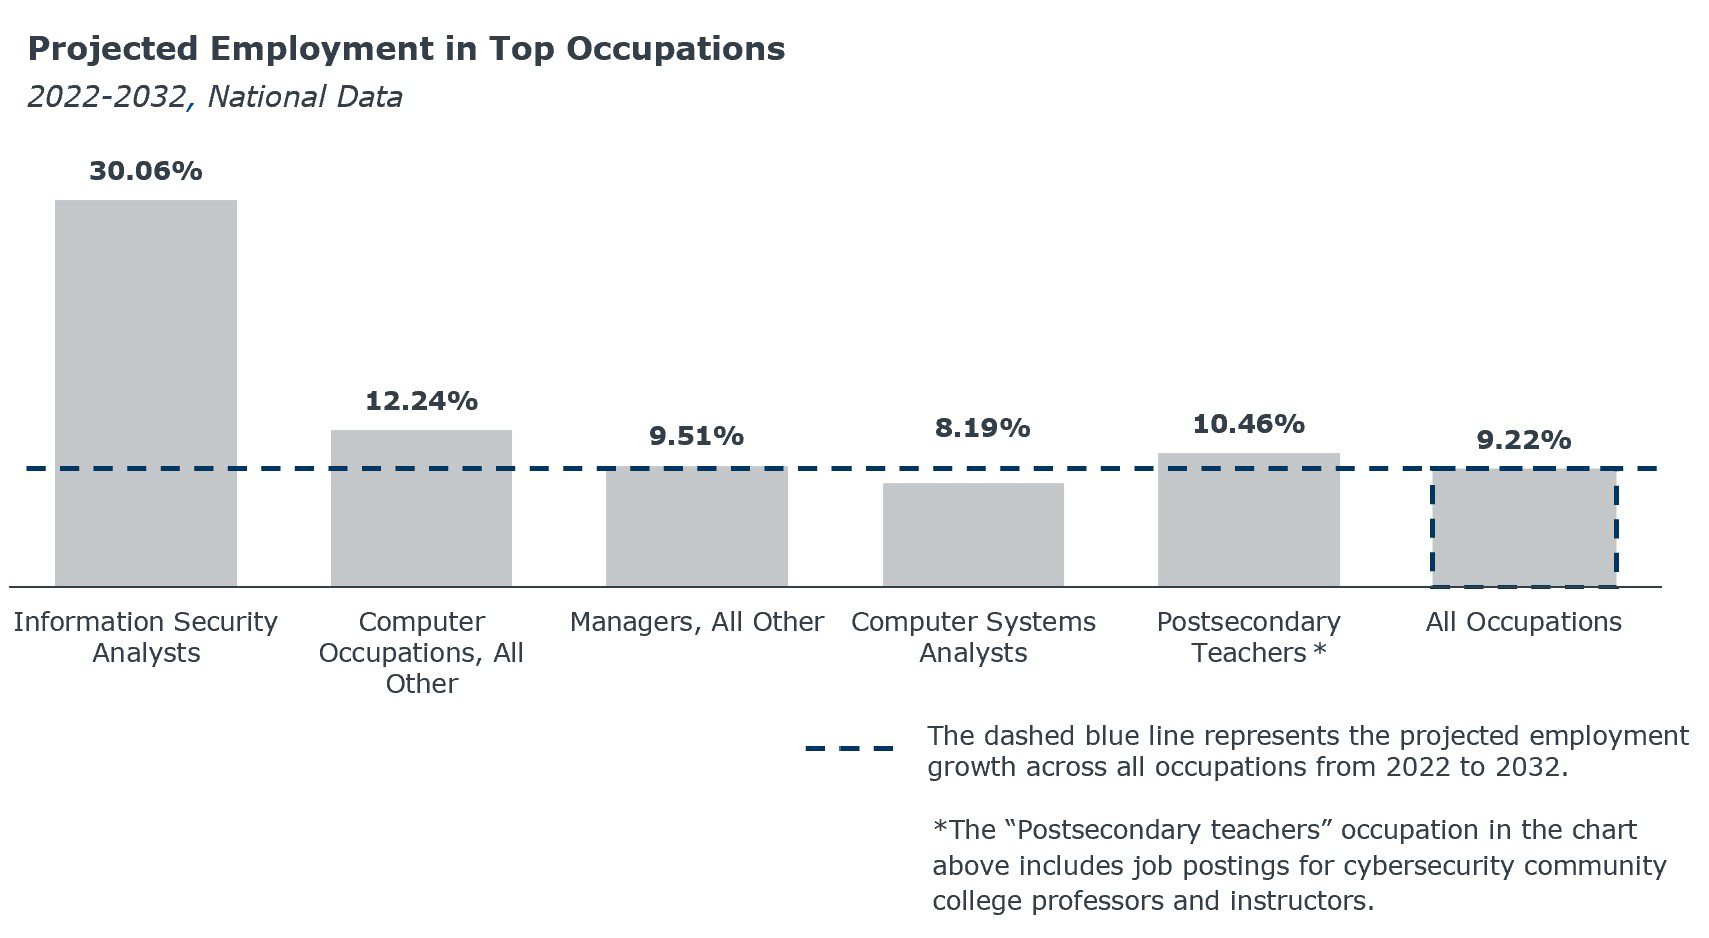 Bar graph showing the projected employment percentages for top occupations